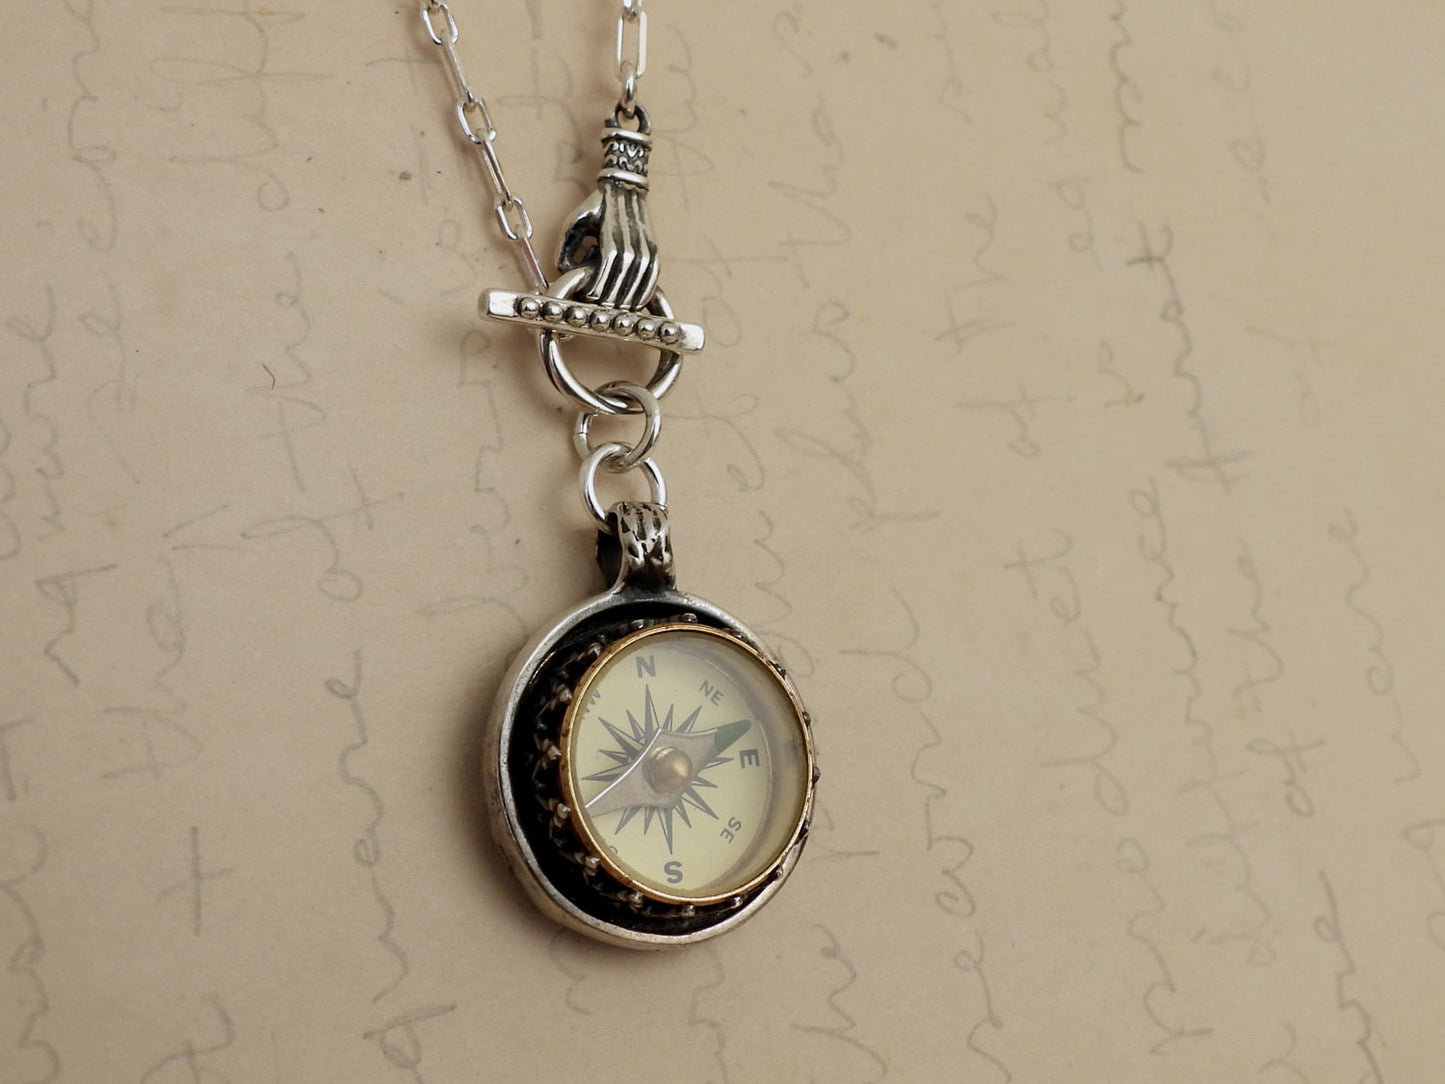 Silver compass Victorian hand double sided cold enamel landscape necklace 925 sterling silver necklace unique gift jewelry for women